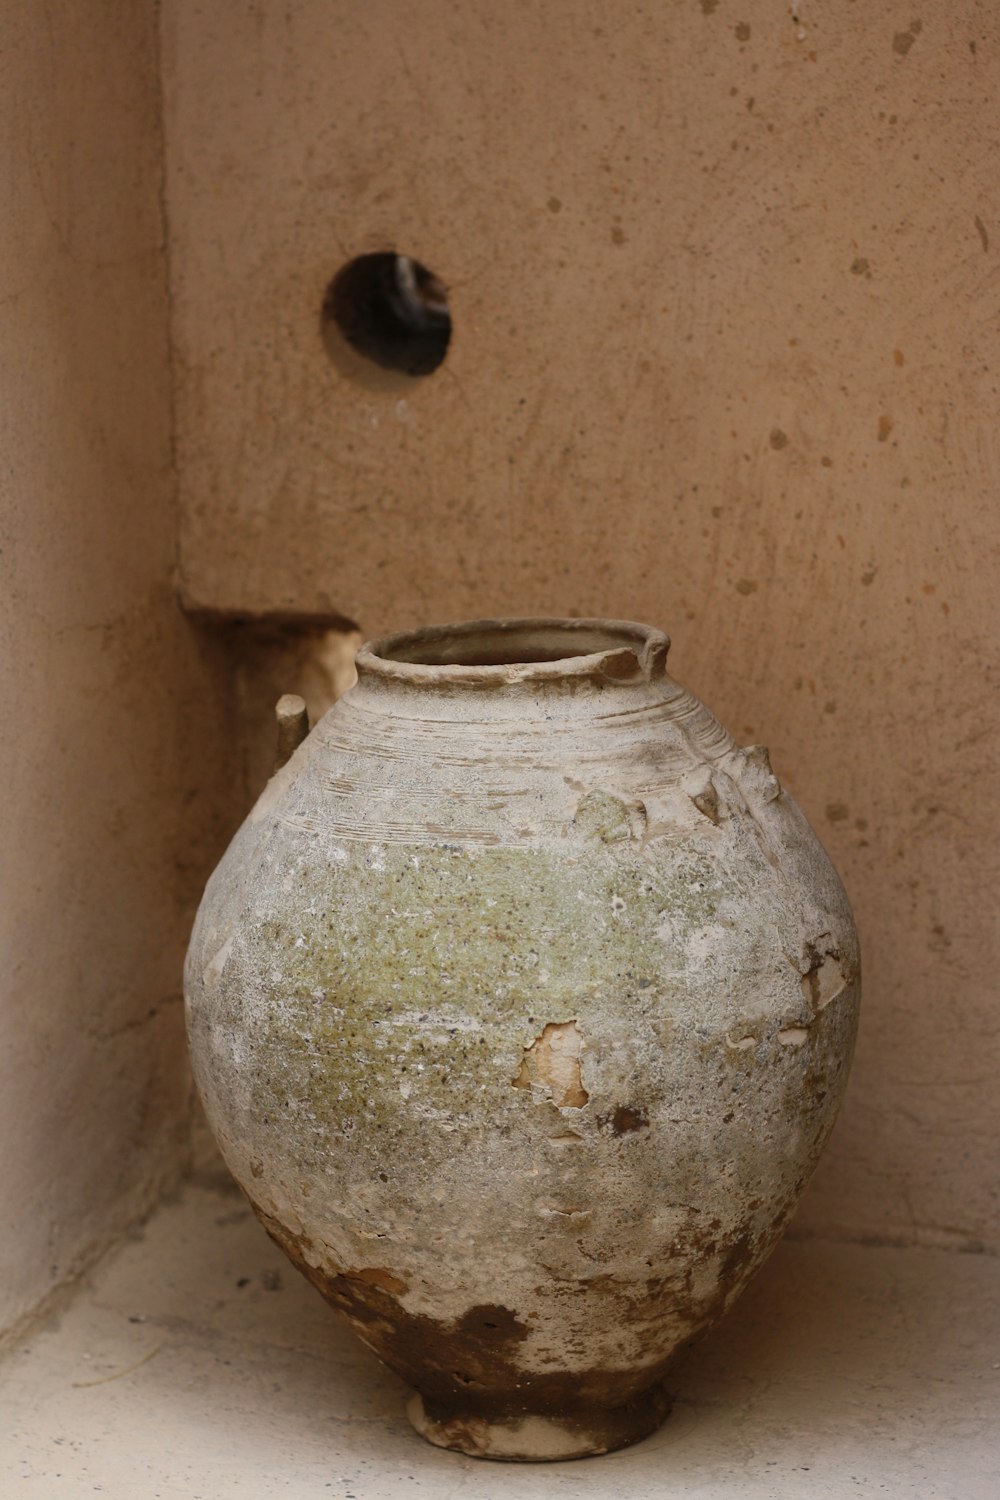 a dirty vase sitting in a corner of a room